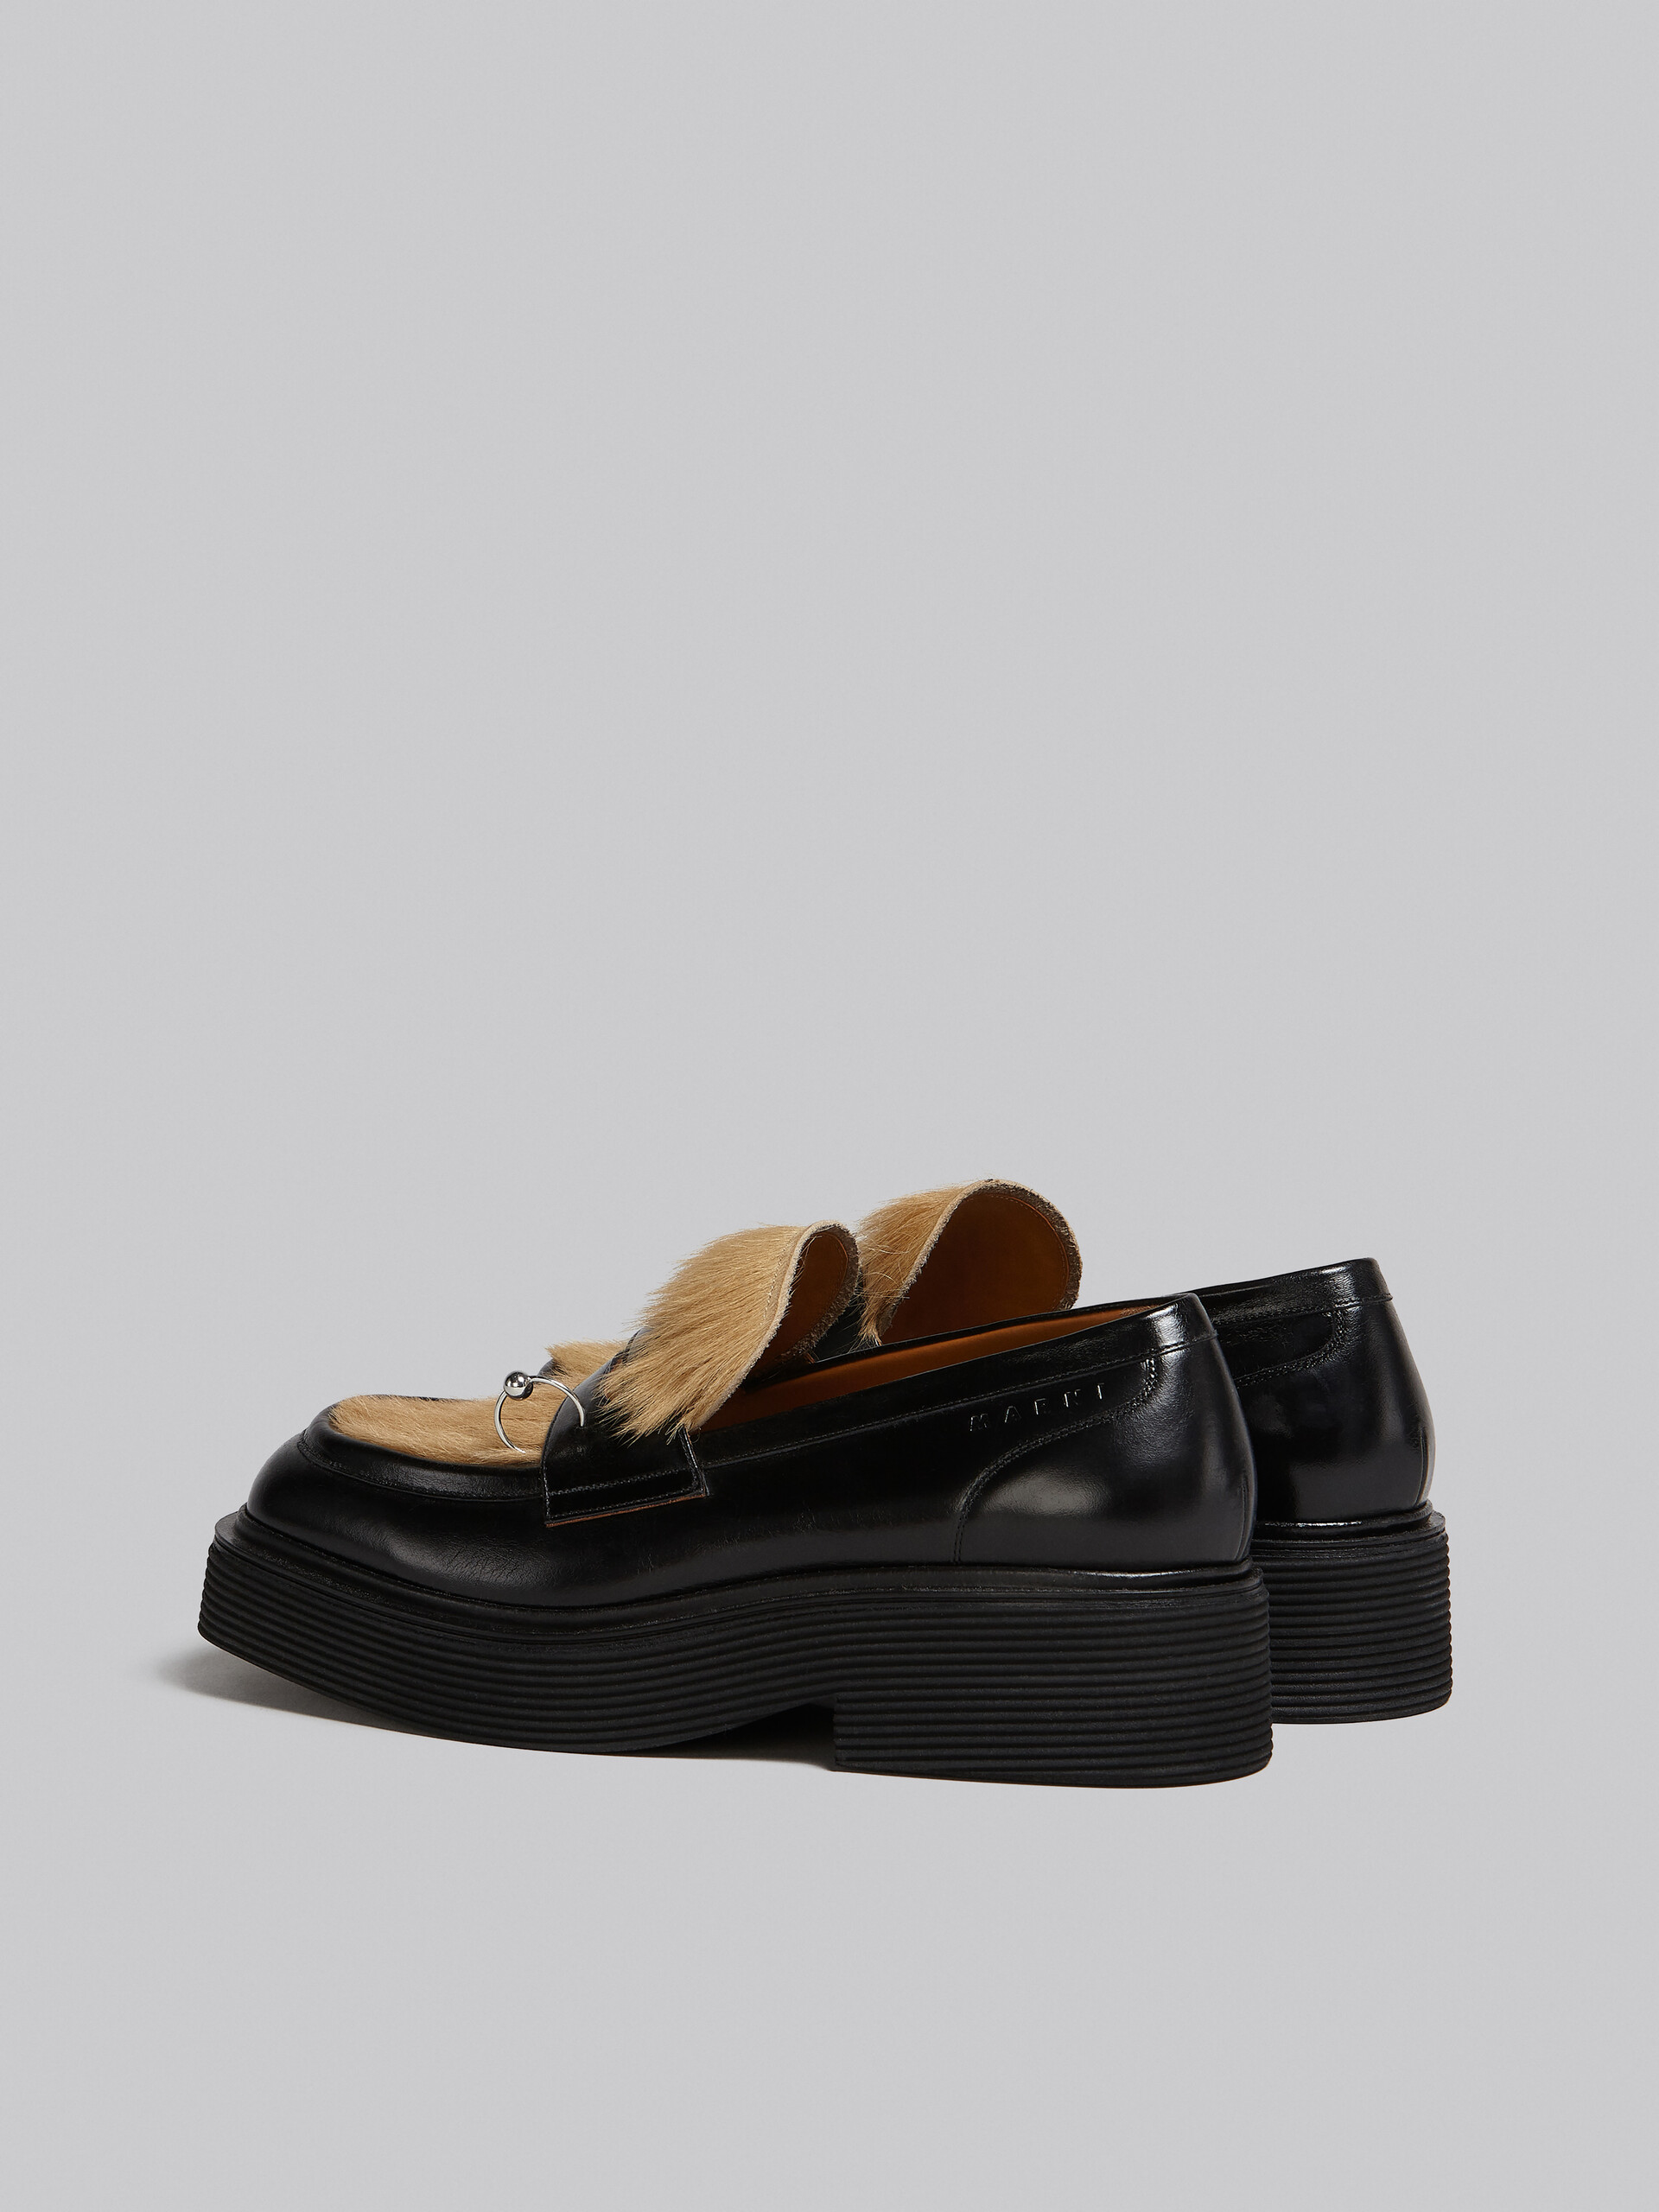 Black leather and beige long hair calfskin moccasin - Mocassin - Image 3